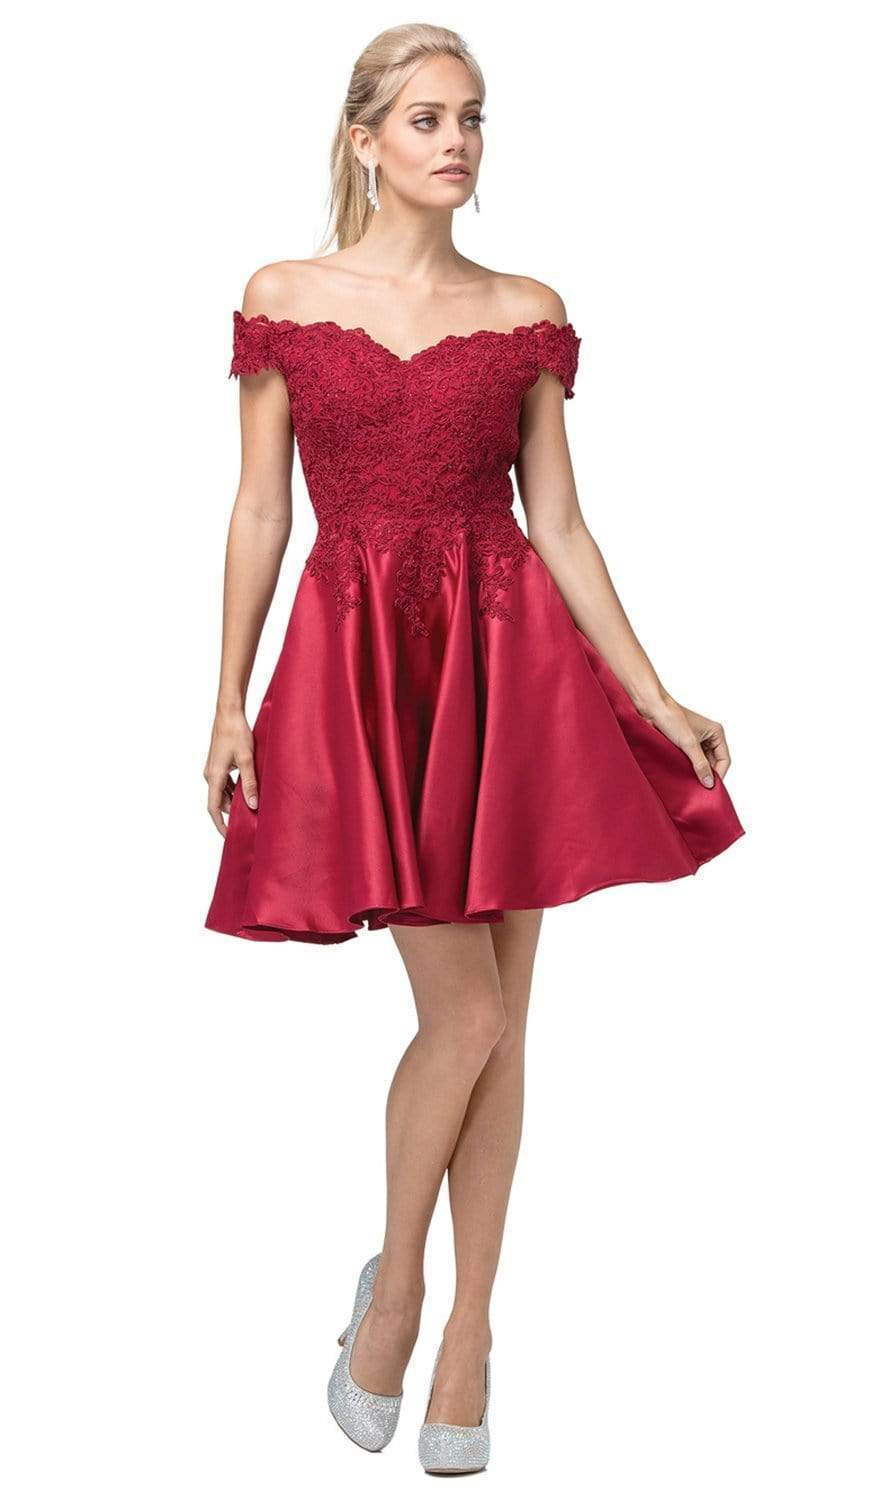 Dancing Queen - 3213 Off Shoulder Lace and Satin Cocktail Dress Homecoming Dresses XS / Burgundy